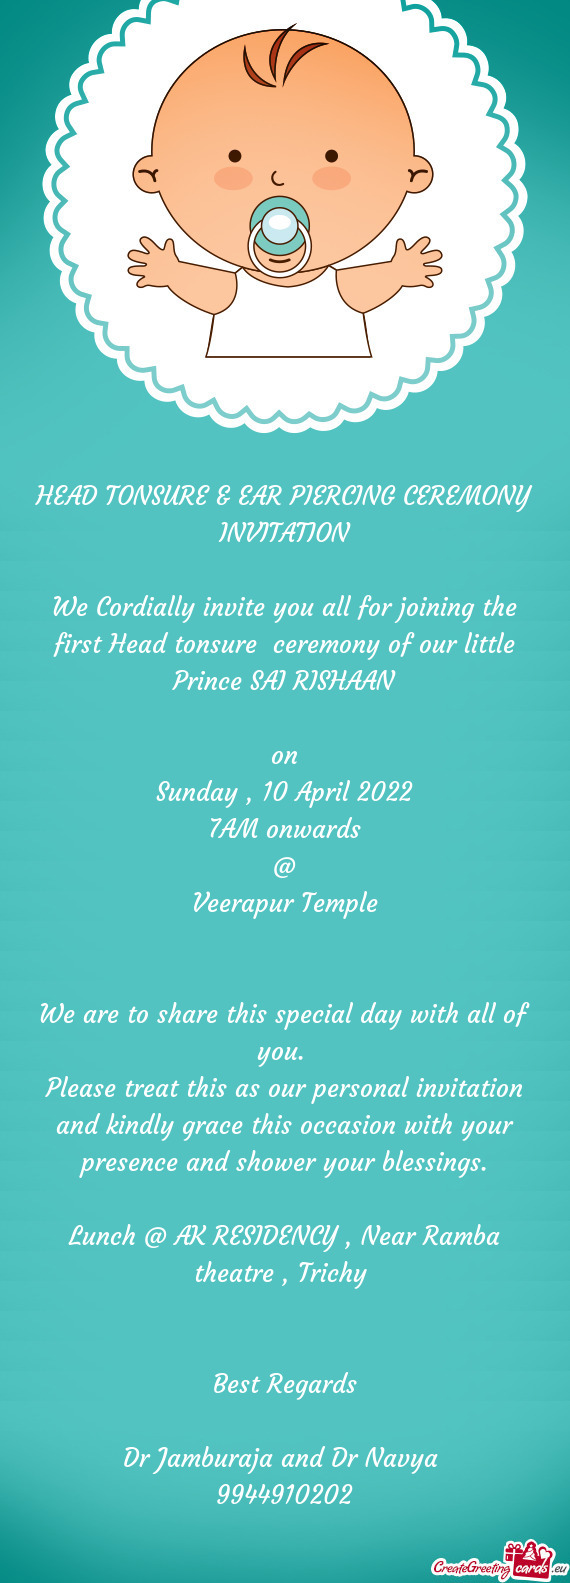 We Cordially invite you all for joining the first Head tonsure ceremony of our little Prince SAI RI